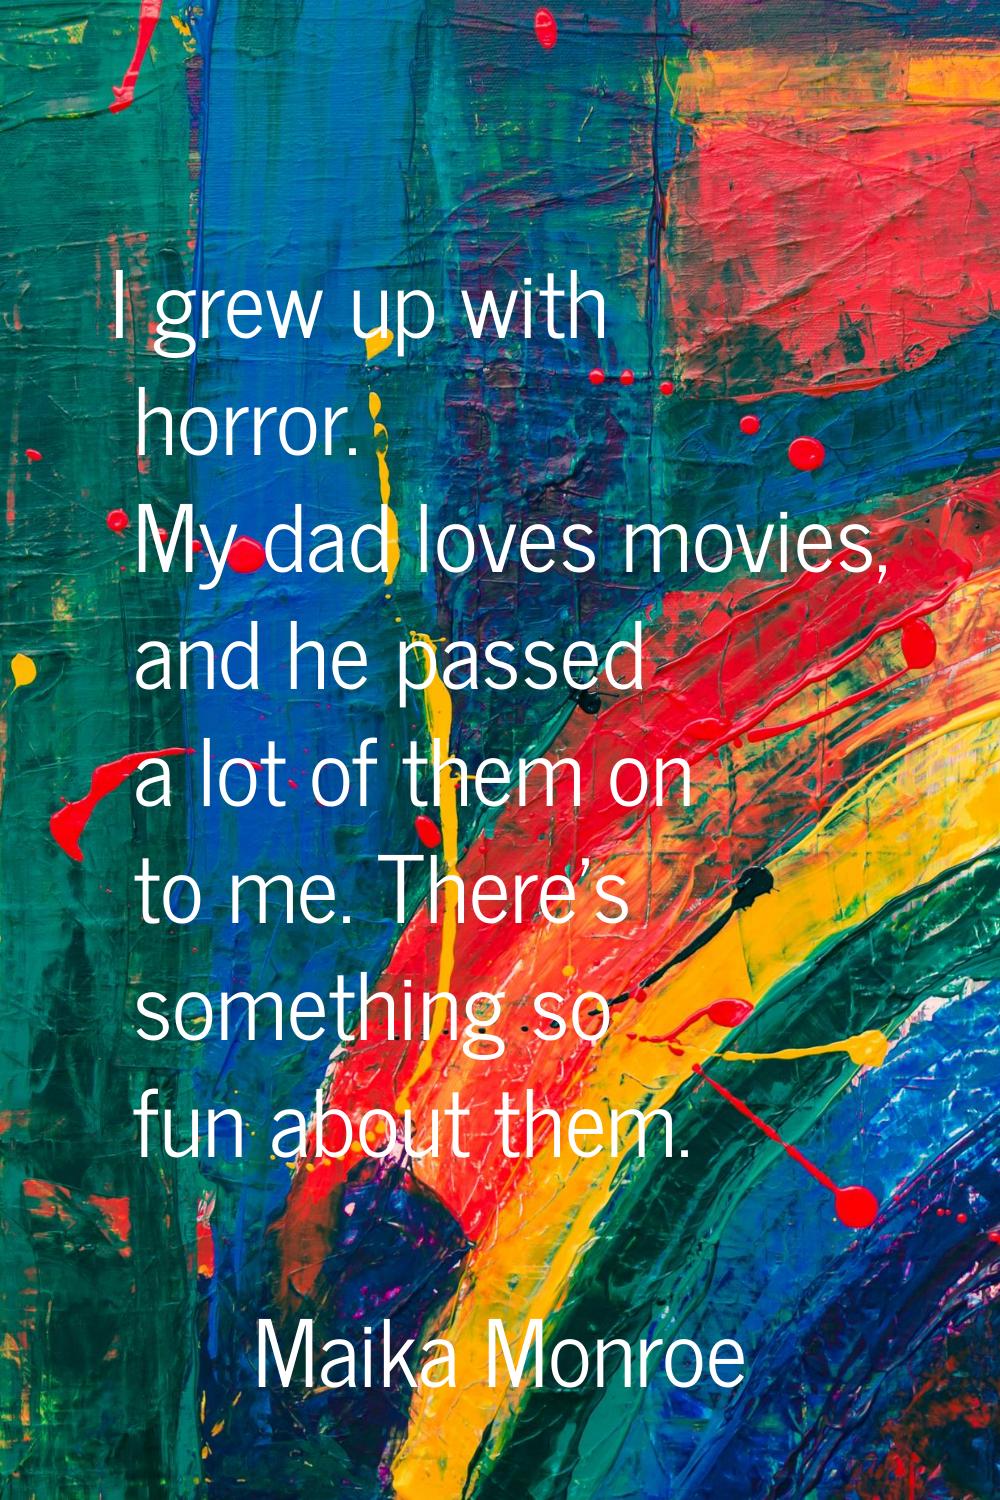 I grew up with horror. My dad loves movies, and he passed a lot of them on to me. There's something